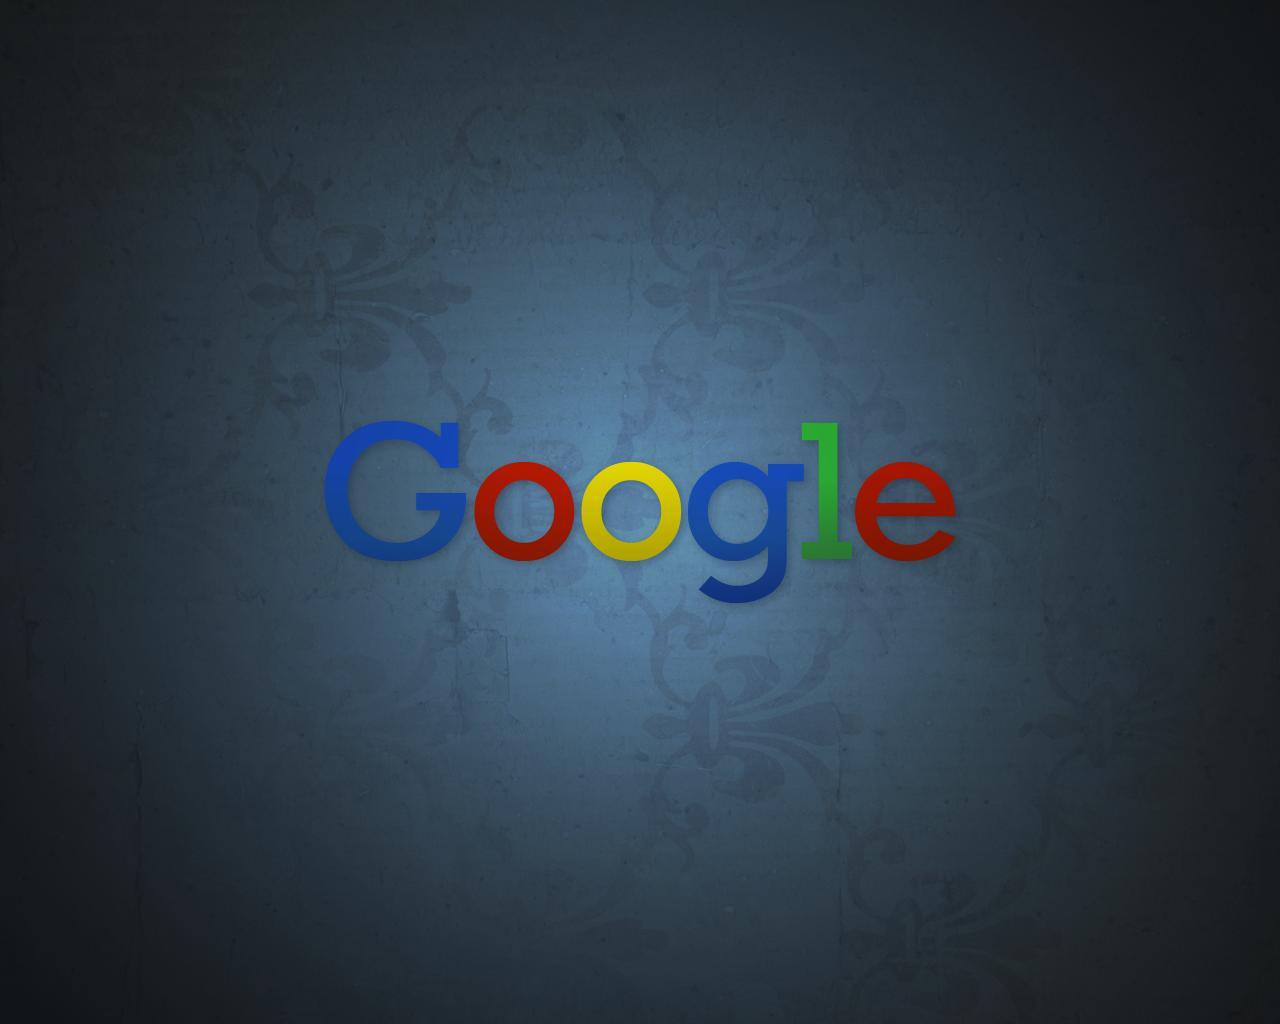 Cool Google Wallpaper Image & Picture